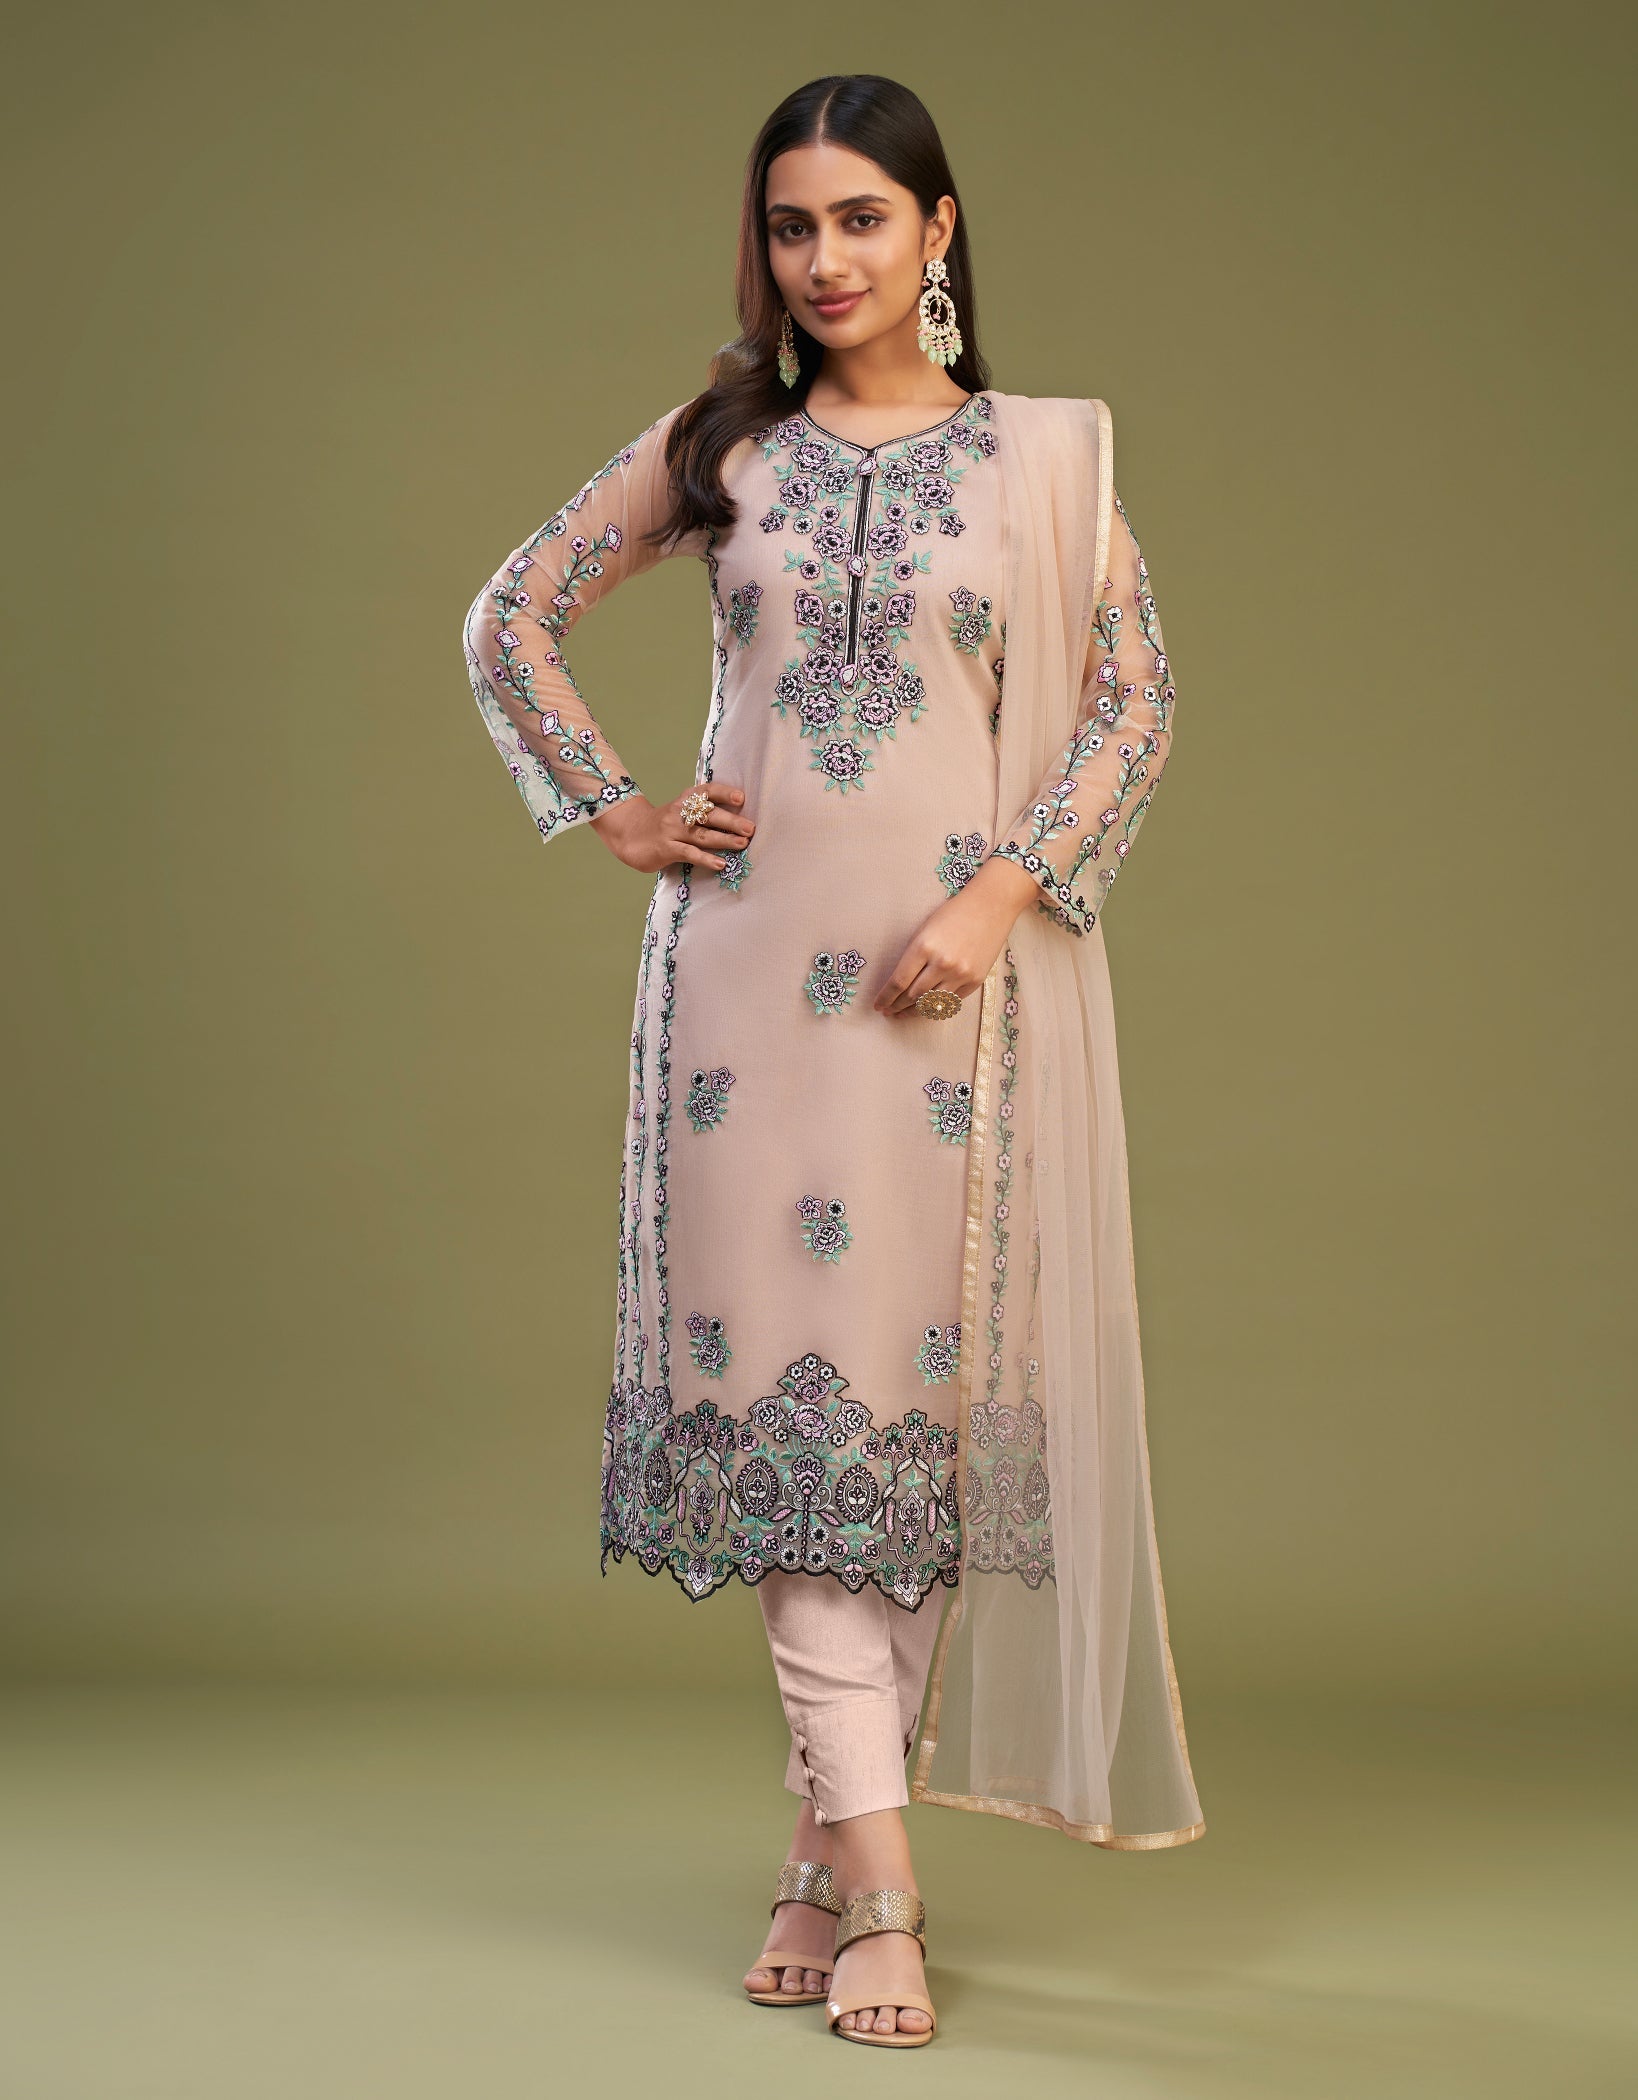 Peach Perfection: Exquisite Multi-Thread Embroidered Salwar Suit for Weddings & Parties